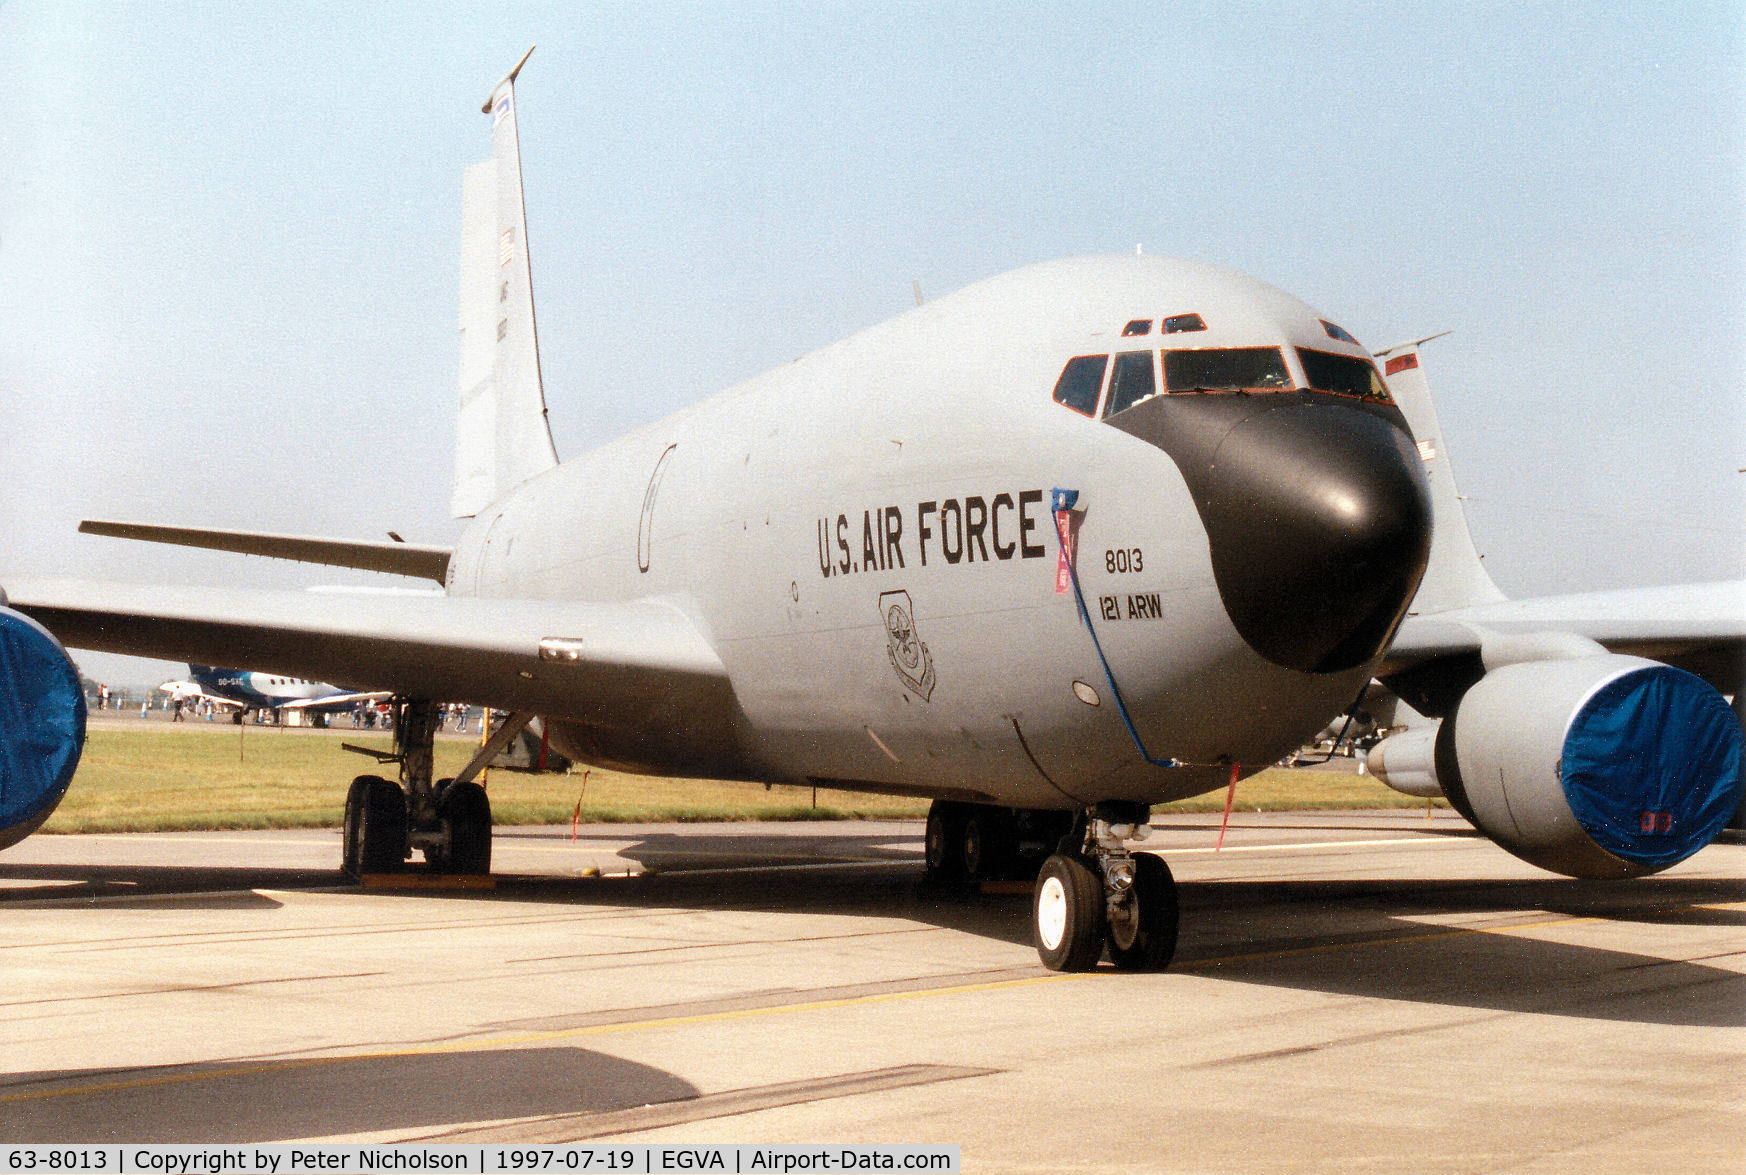 63-8013, 1963 Boeing KC-135R Stratotanker C/N 18600, KC-135R Stratotanker, callsign Gold 11, of 166th Air Refuelling Squadron/121st Air Refuelling Wing at Rickenbacker AFB on display at the 1997 Intnl Air Tattoo at RAF Fairford.